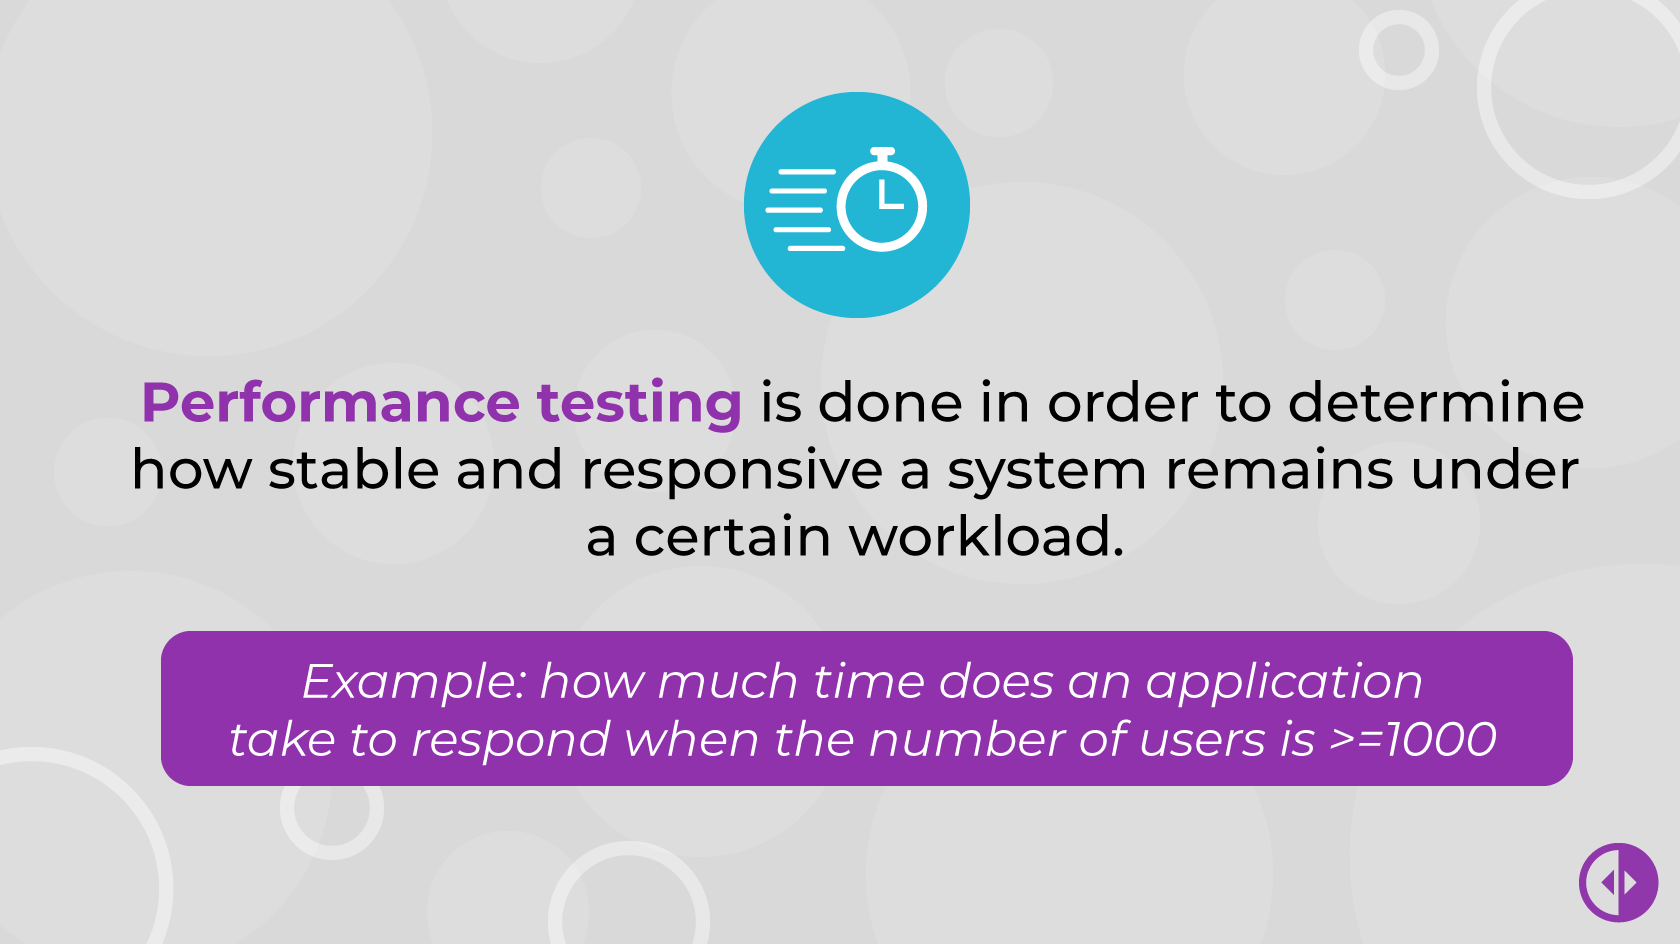 Performance testing done in order to determine stable